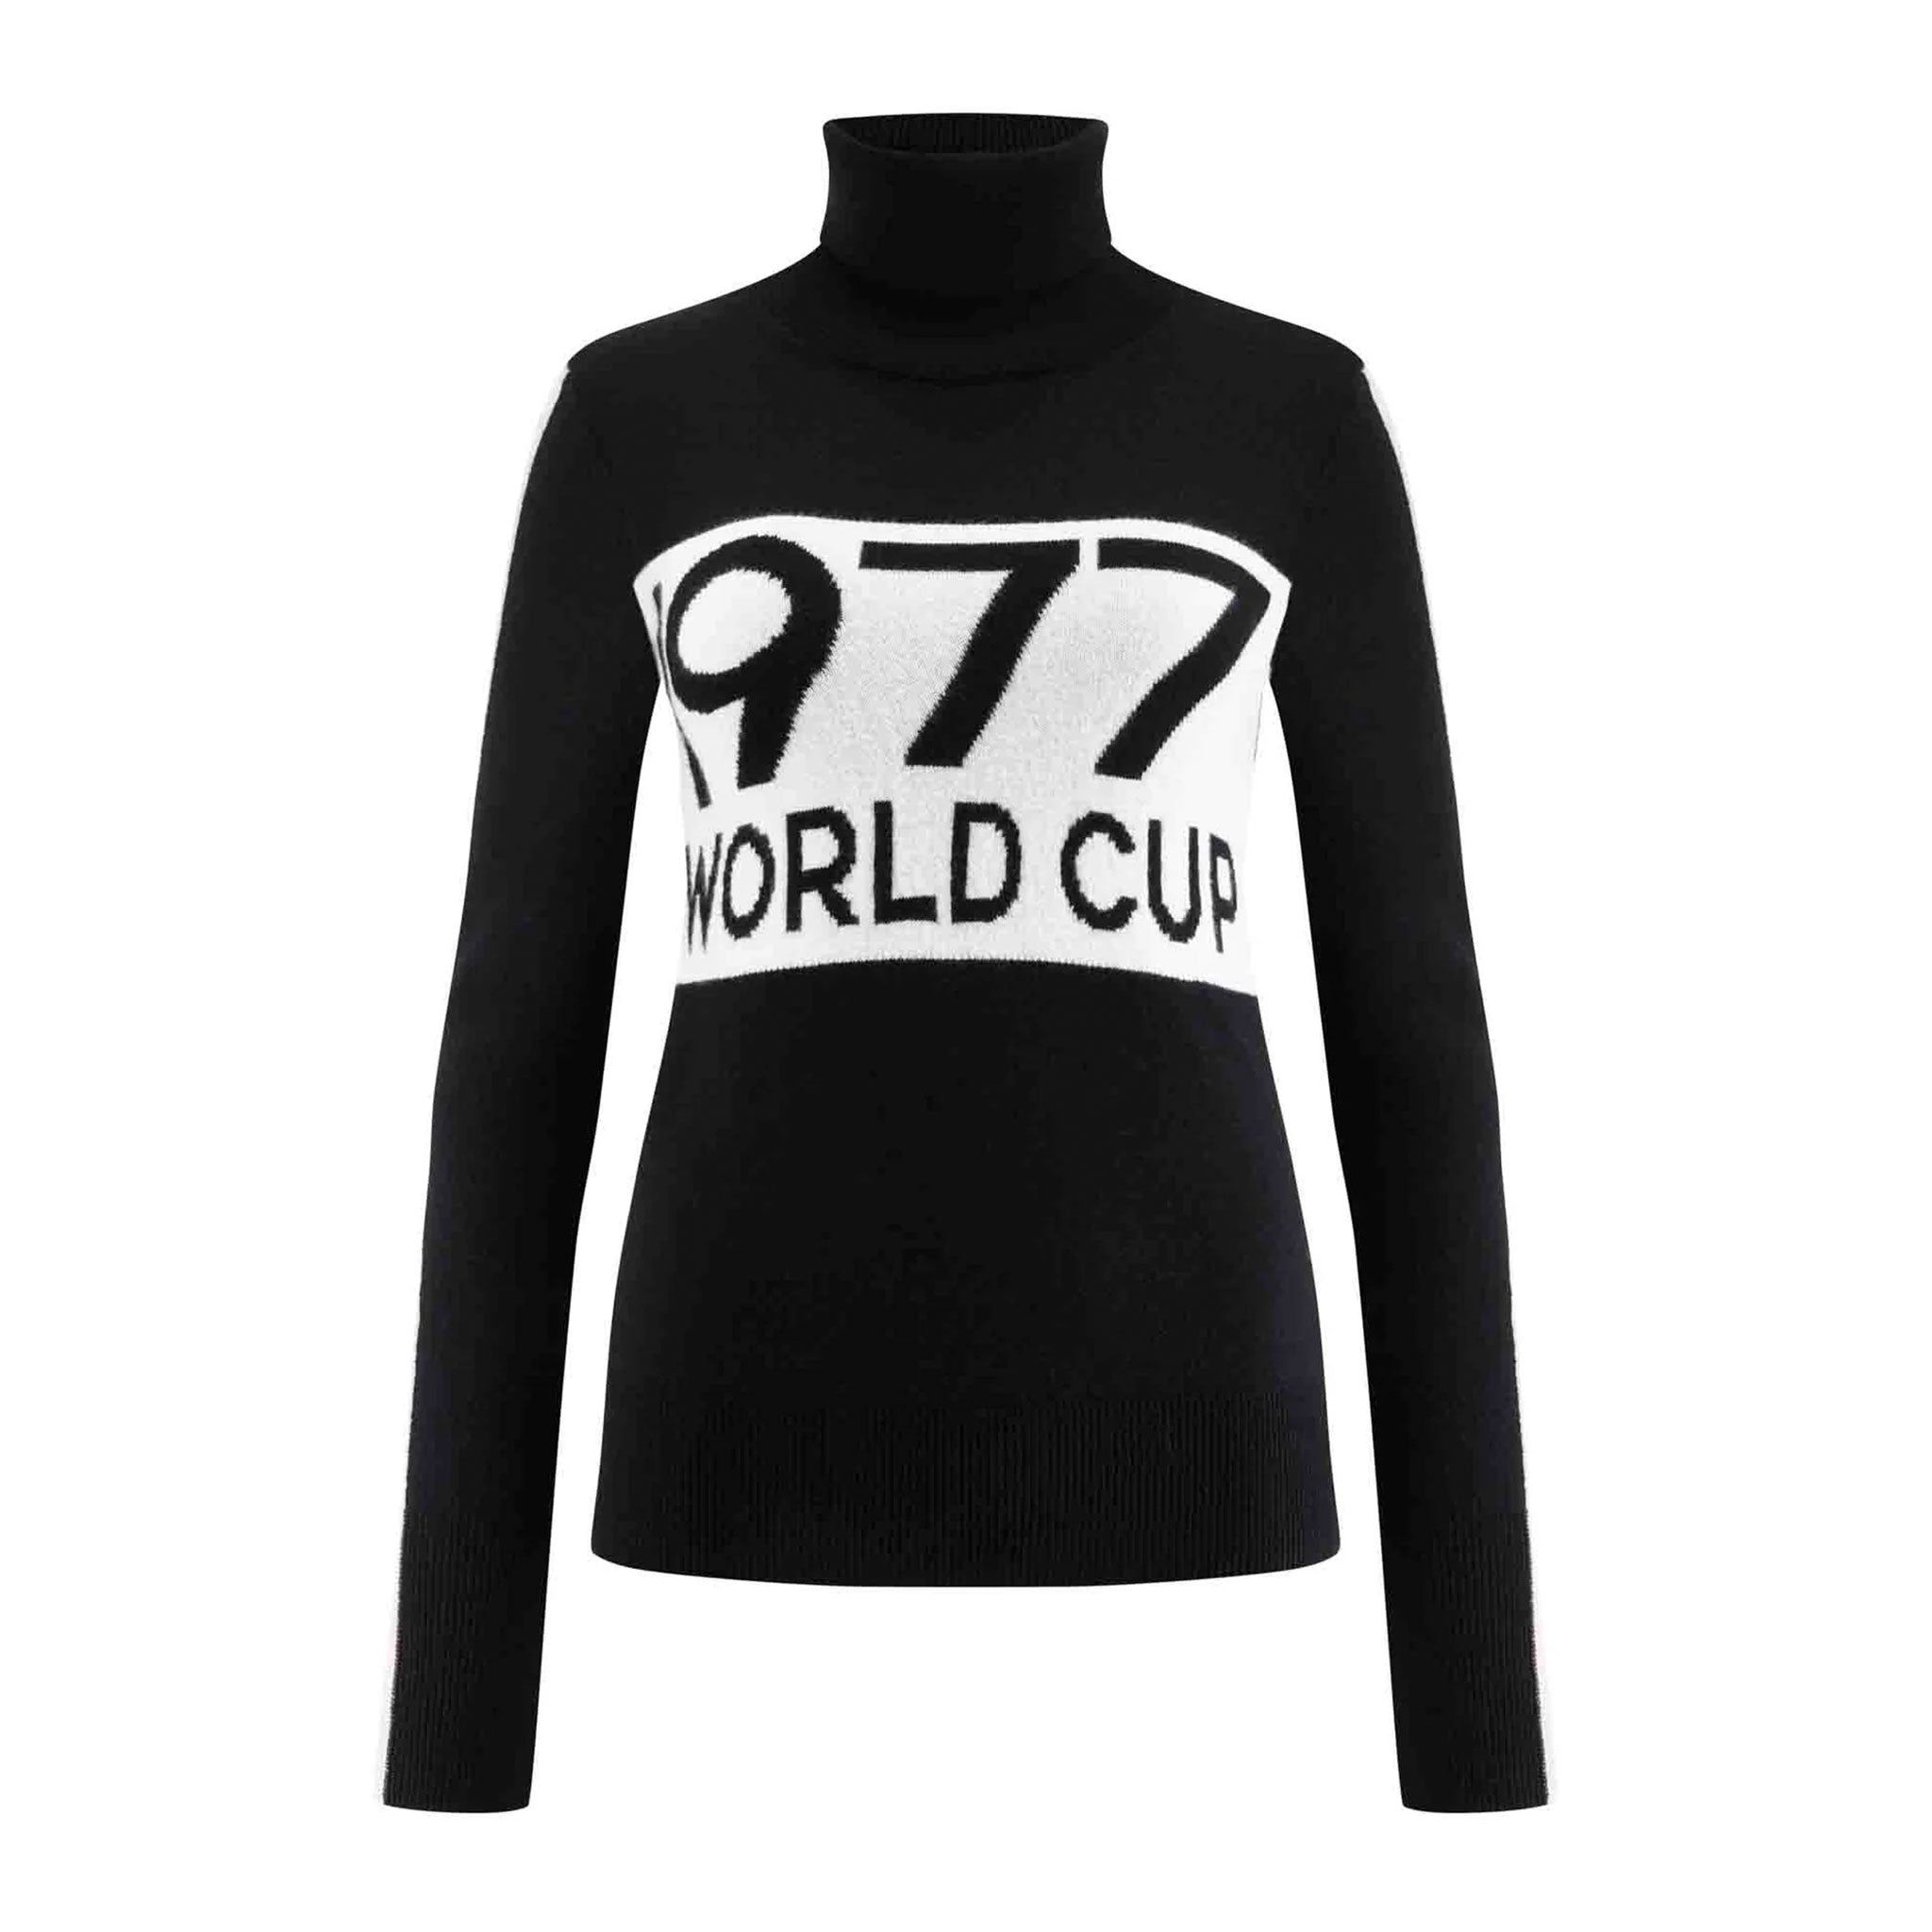 1977 World Cup Sweater in Black